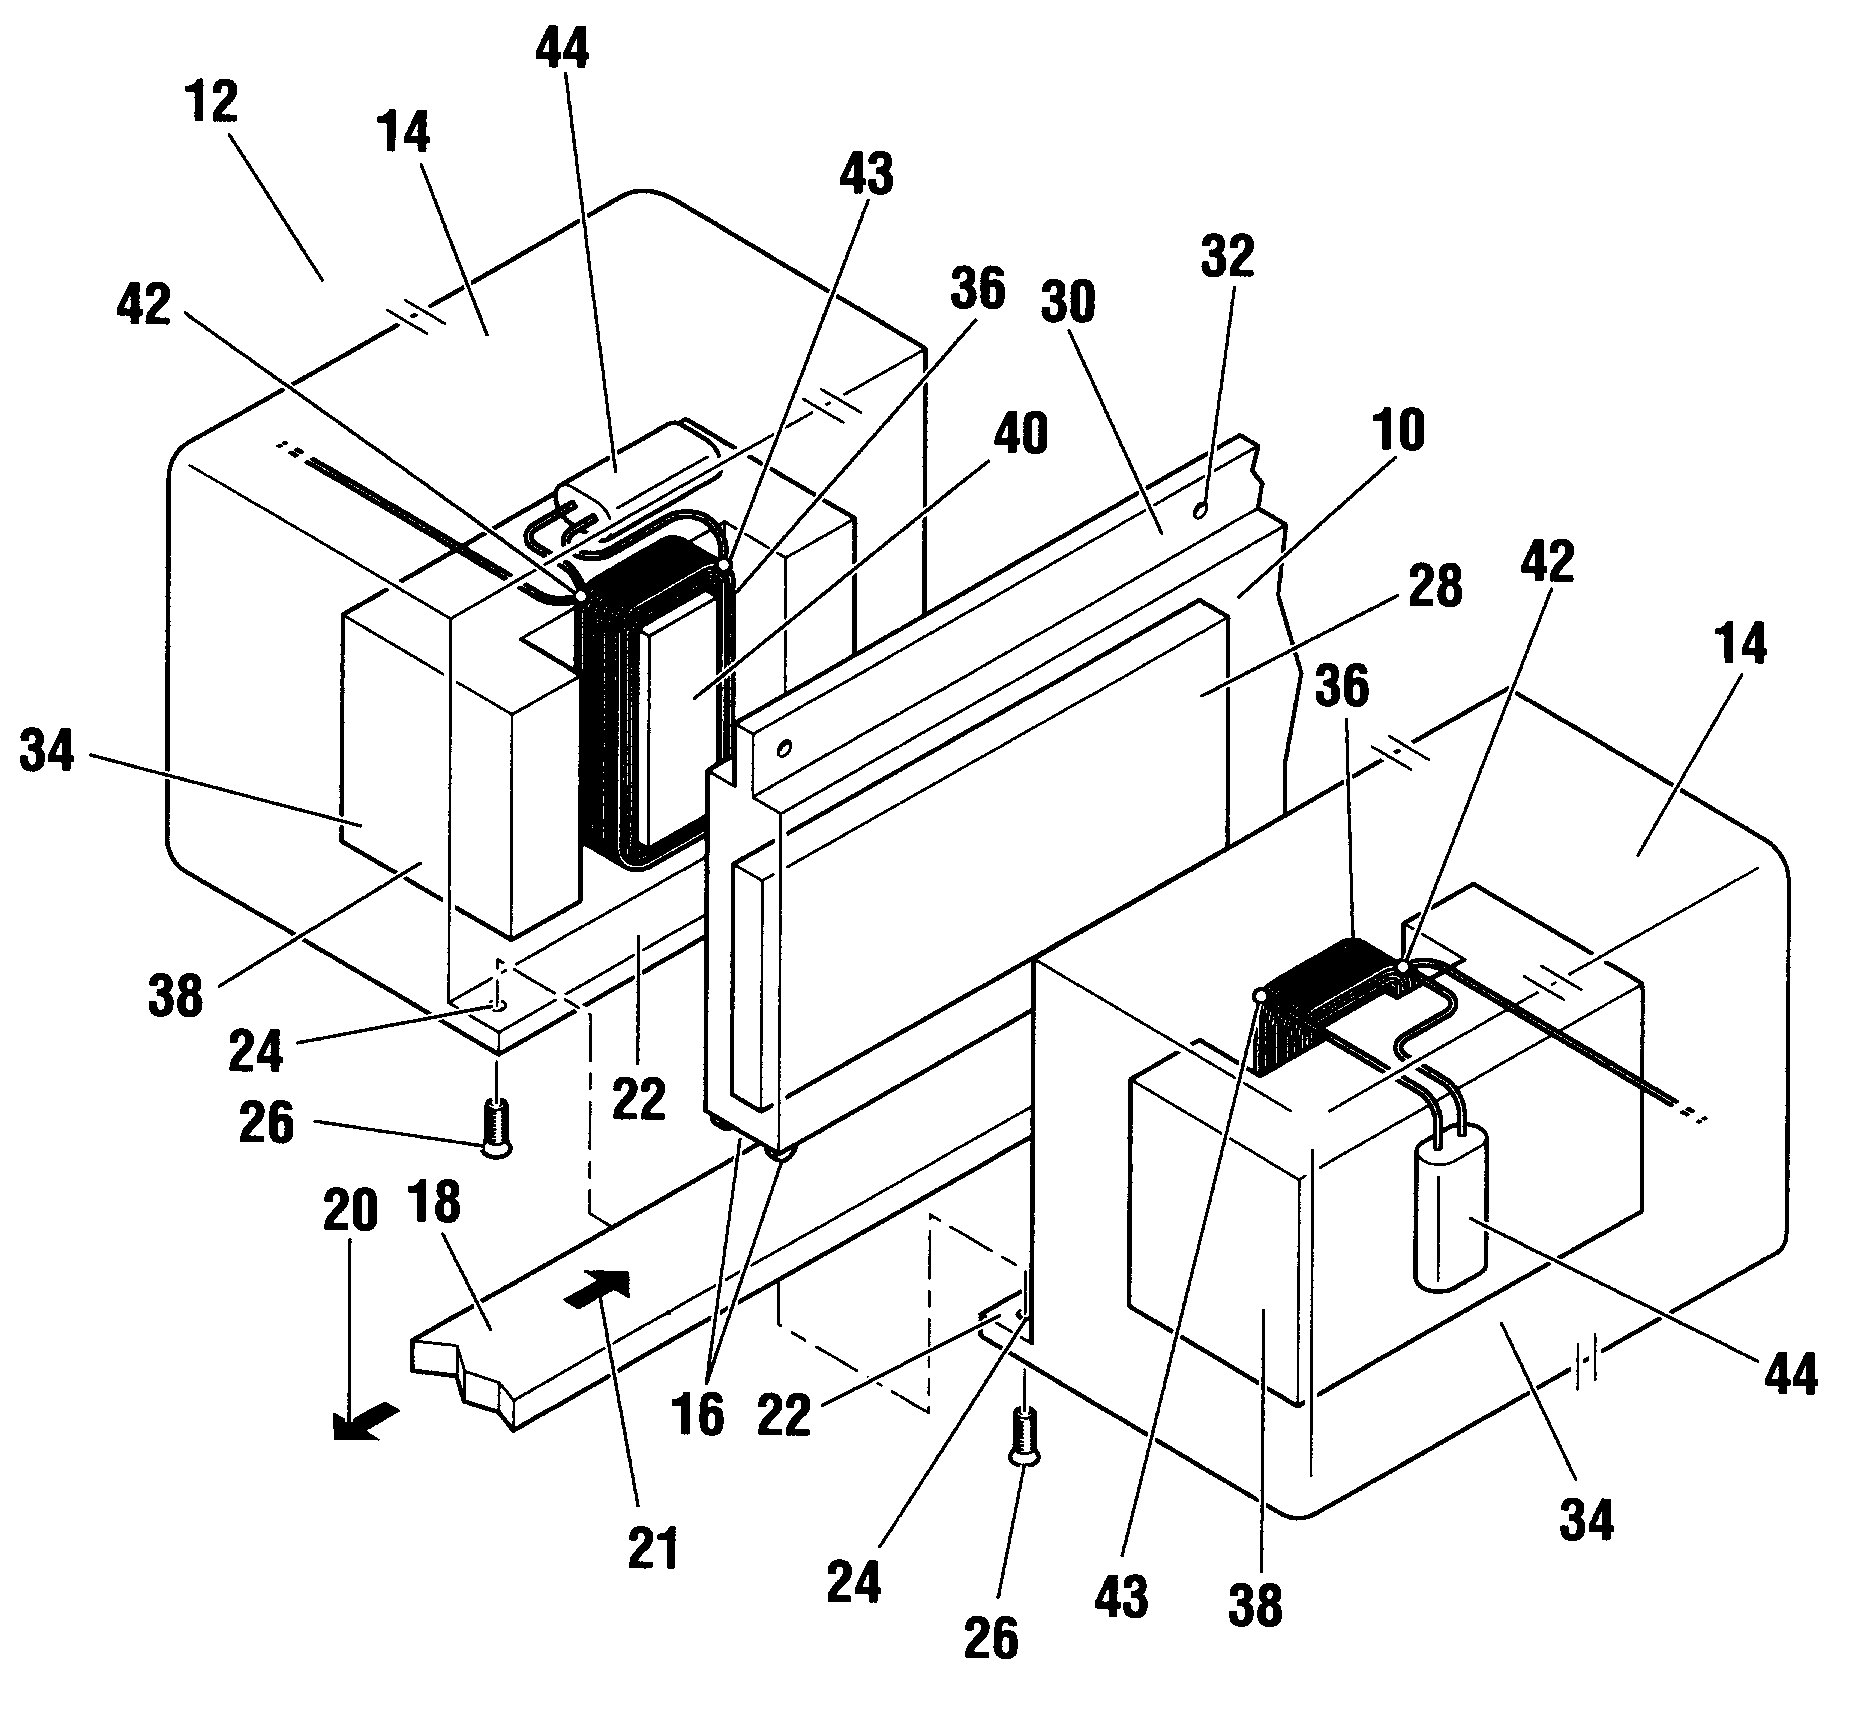 Axial air gap machine having stator and rotor discs formed of multiple detachable segments